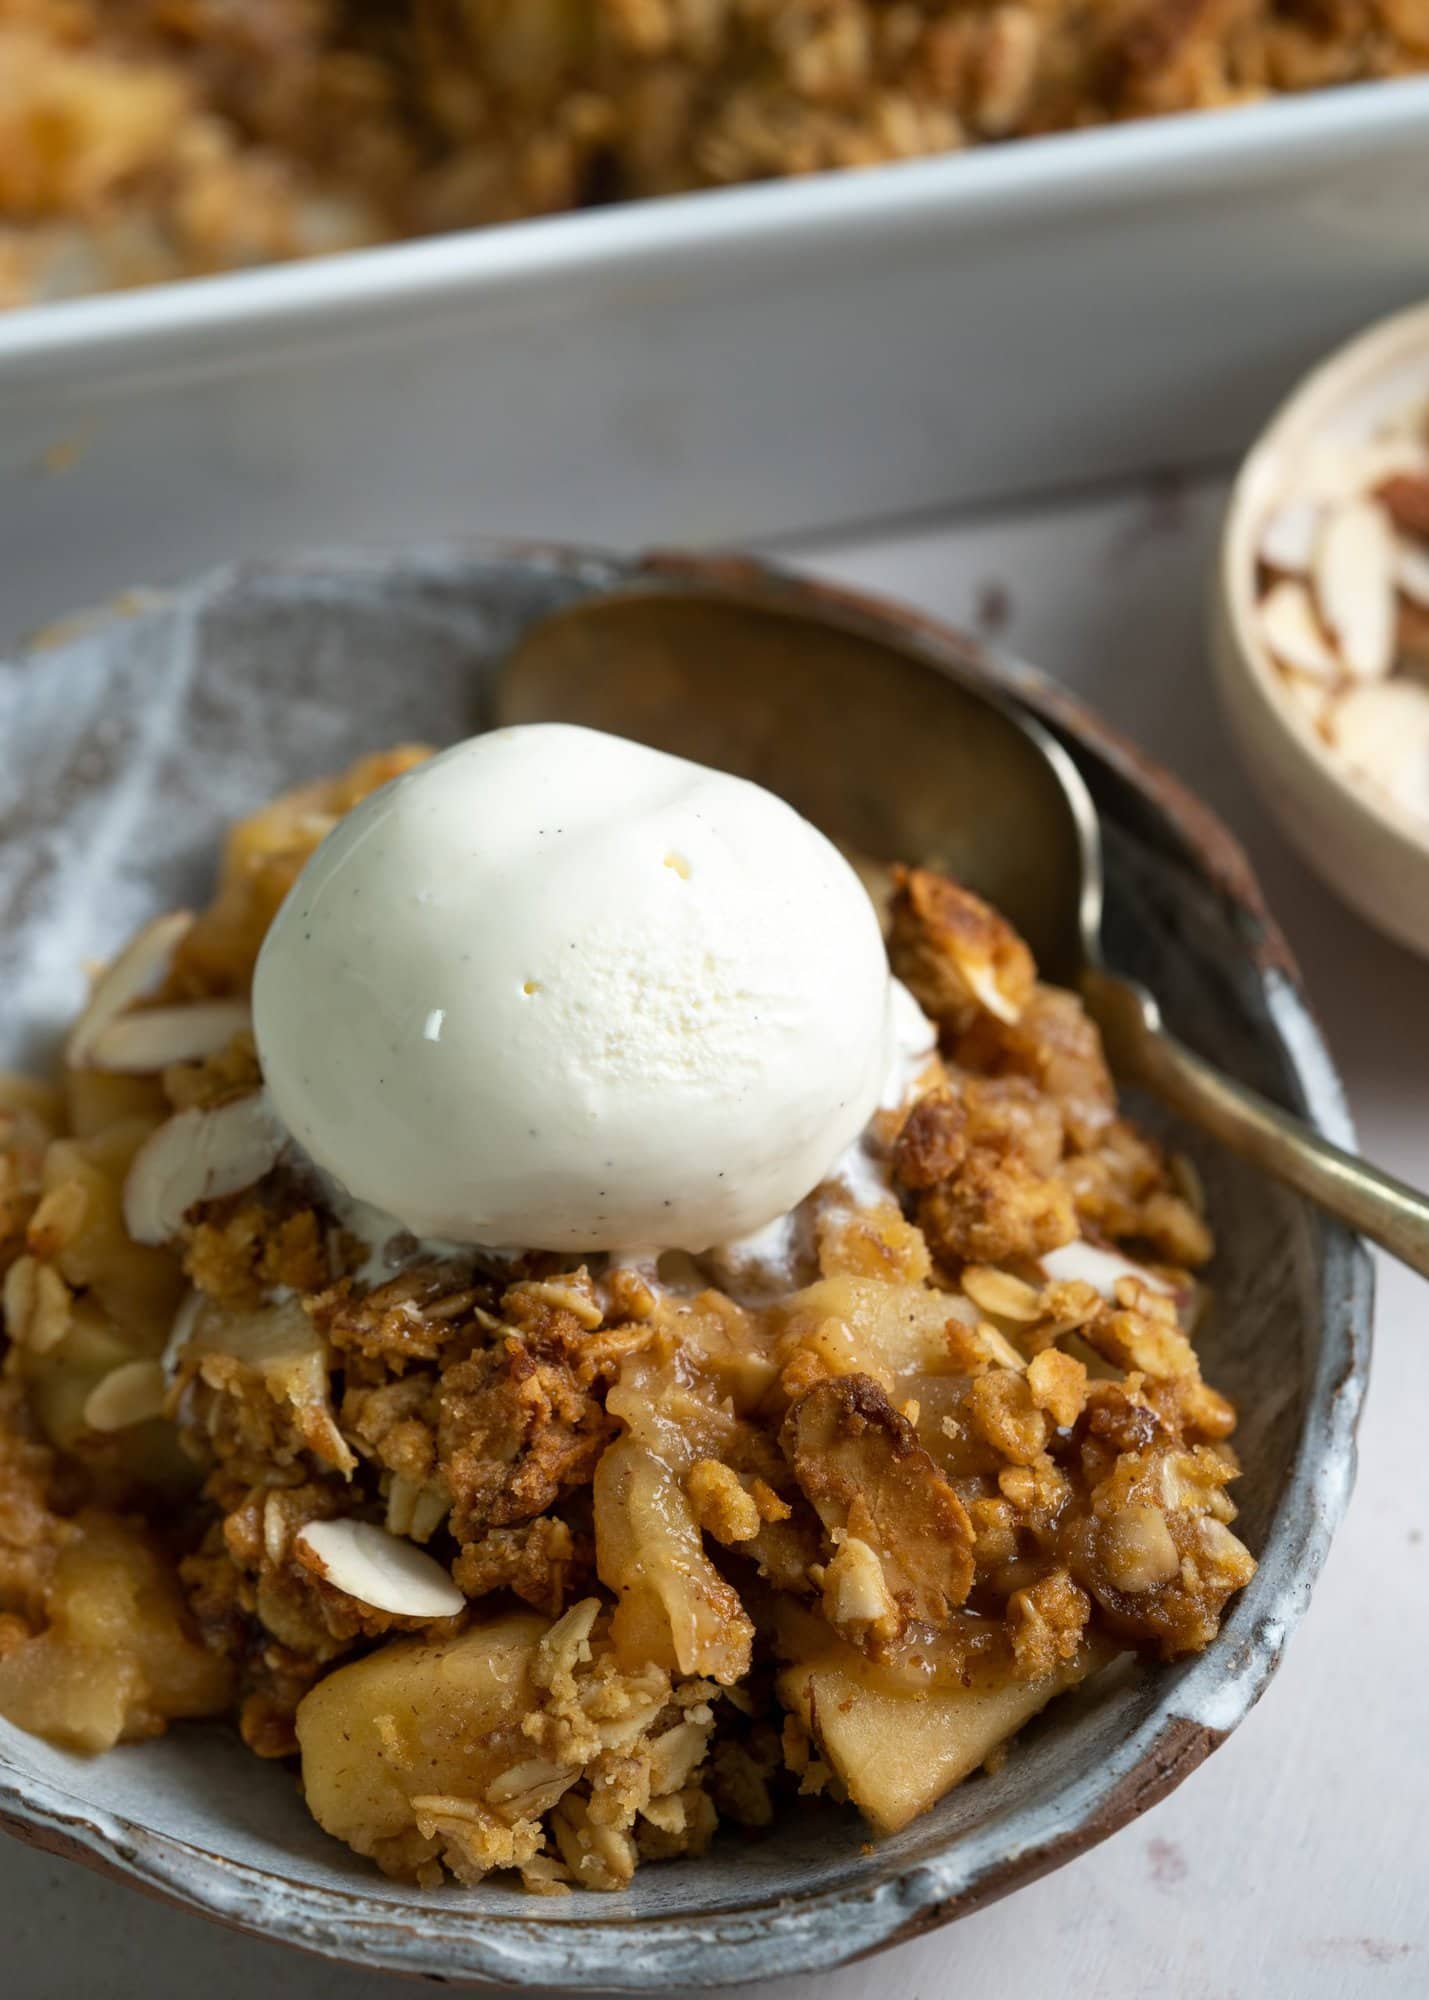 Apple crisp served on a bowl with a scoop of vanilla ice cream on top and spoon.